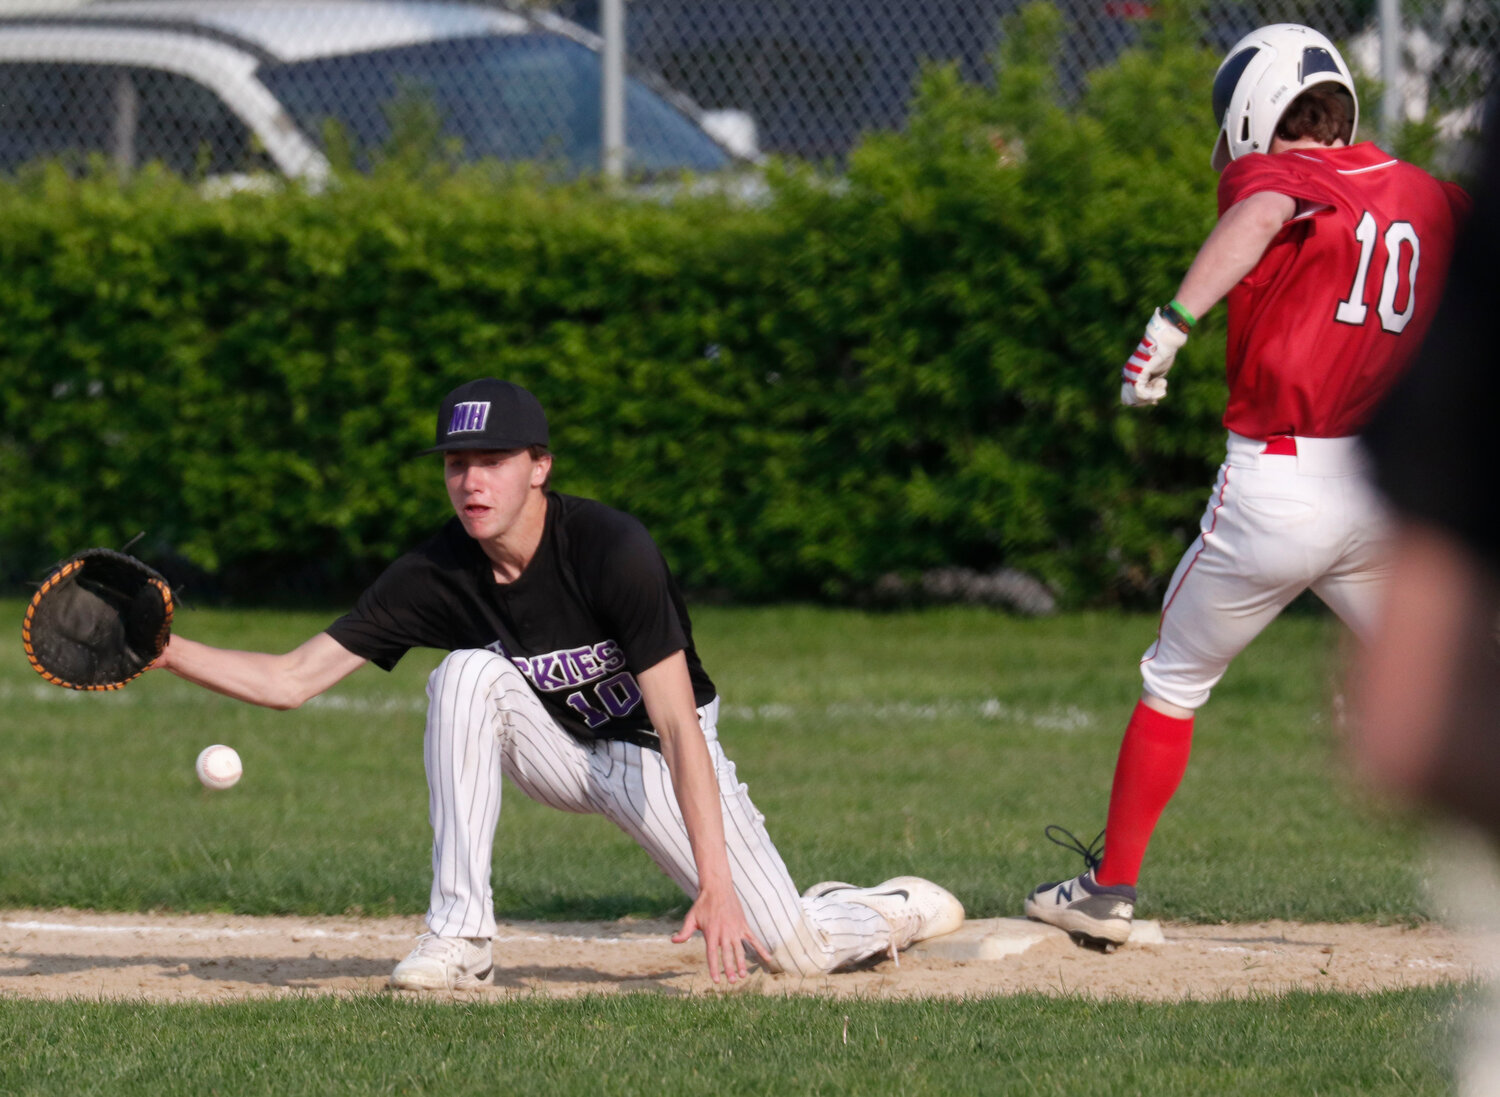 First baseman Lucas Andriozzi attempts to block a throw in the dirt on a play at first base.